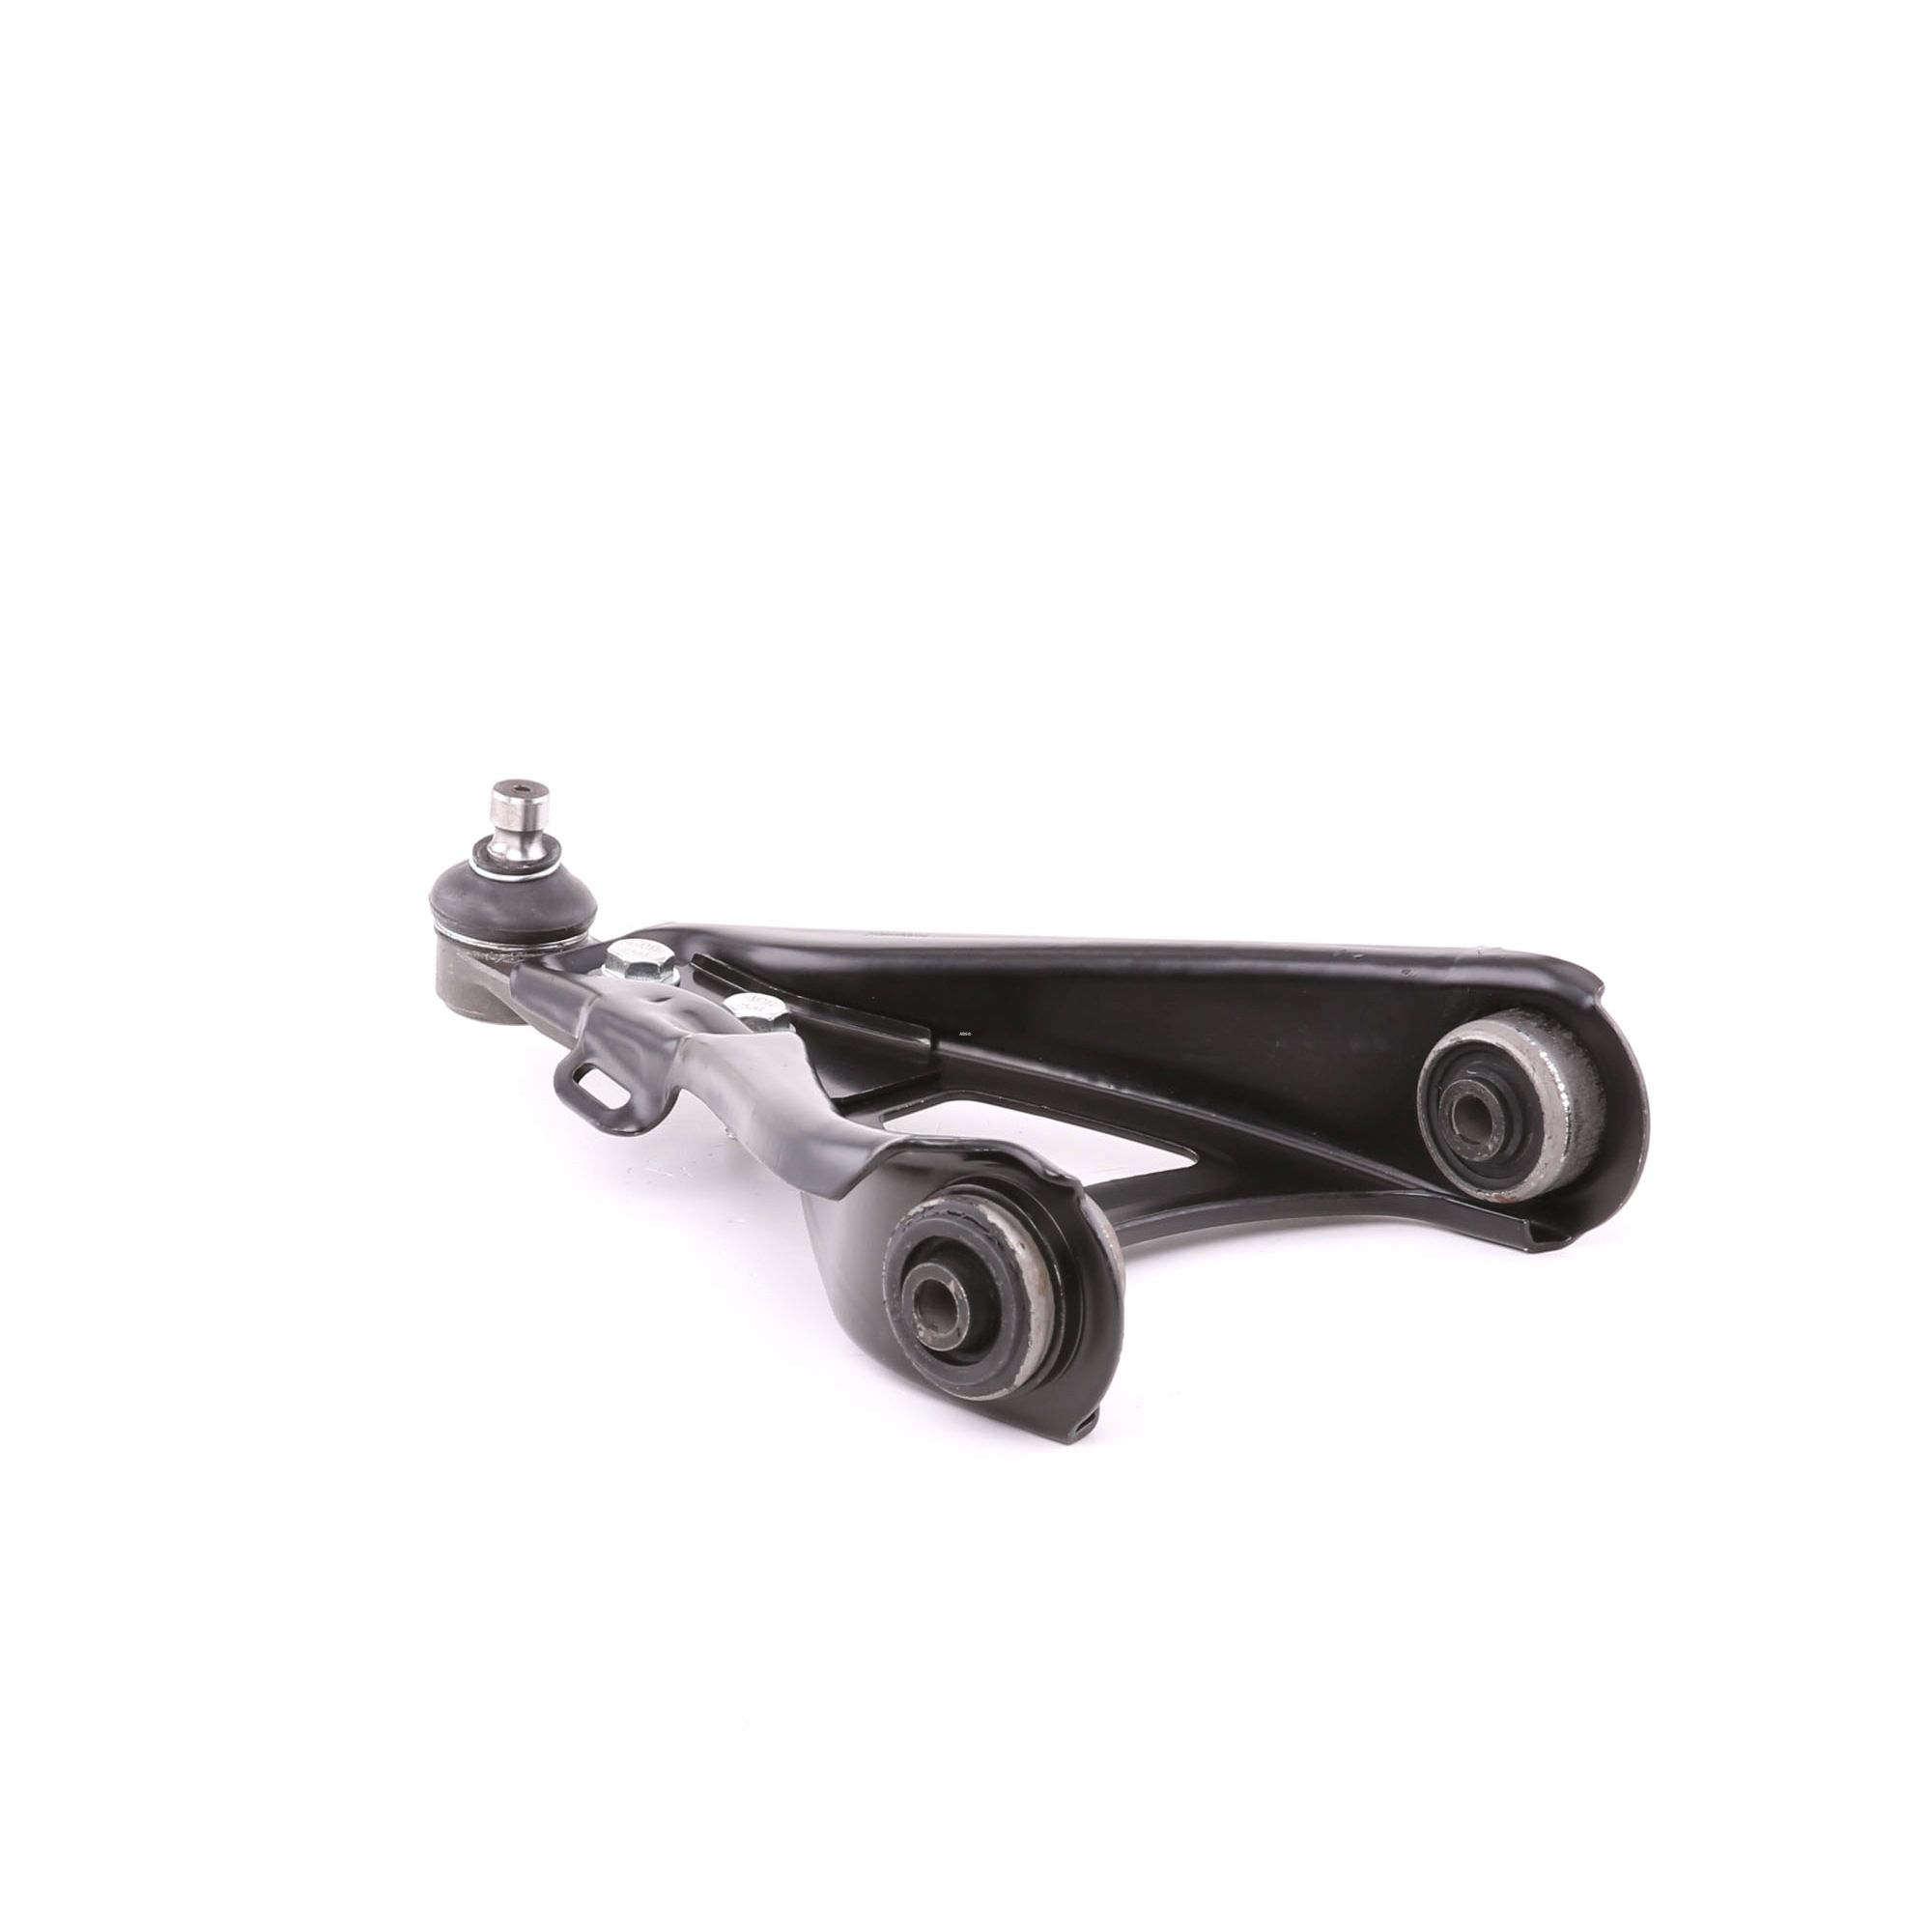 A.B.S. 210861 Suspension arm with ball joint, with rubber mount, Control Arm, Steel, Cone Size: 16 mm